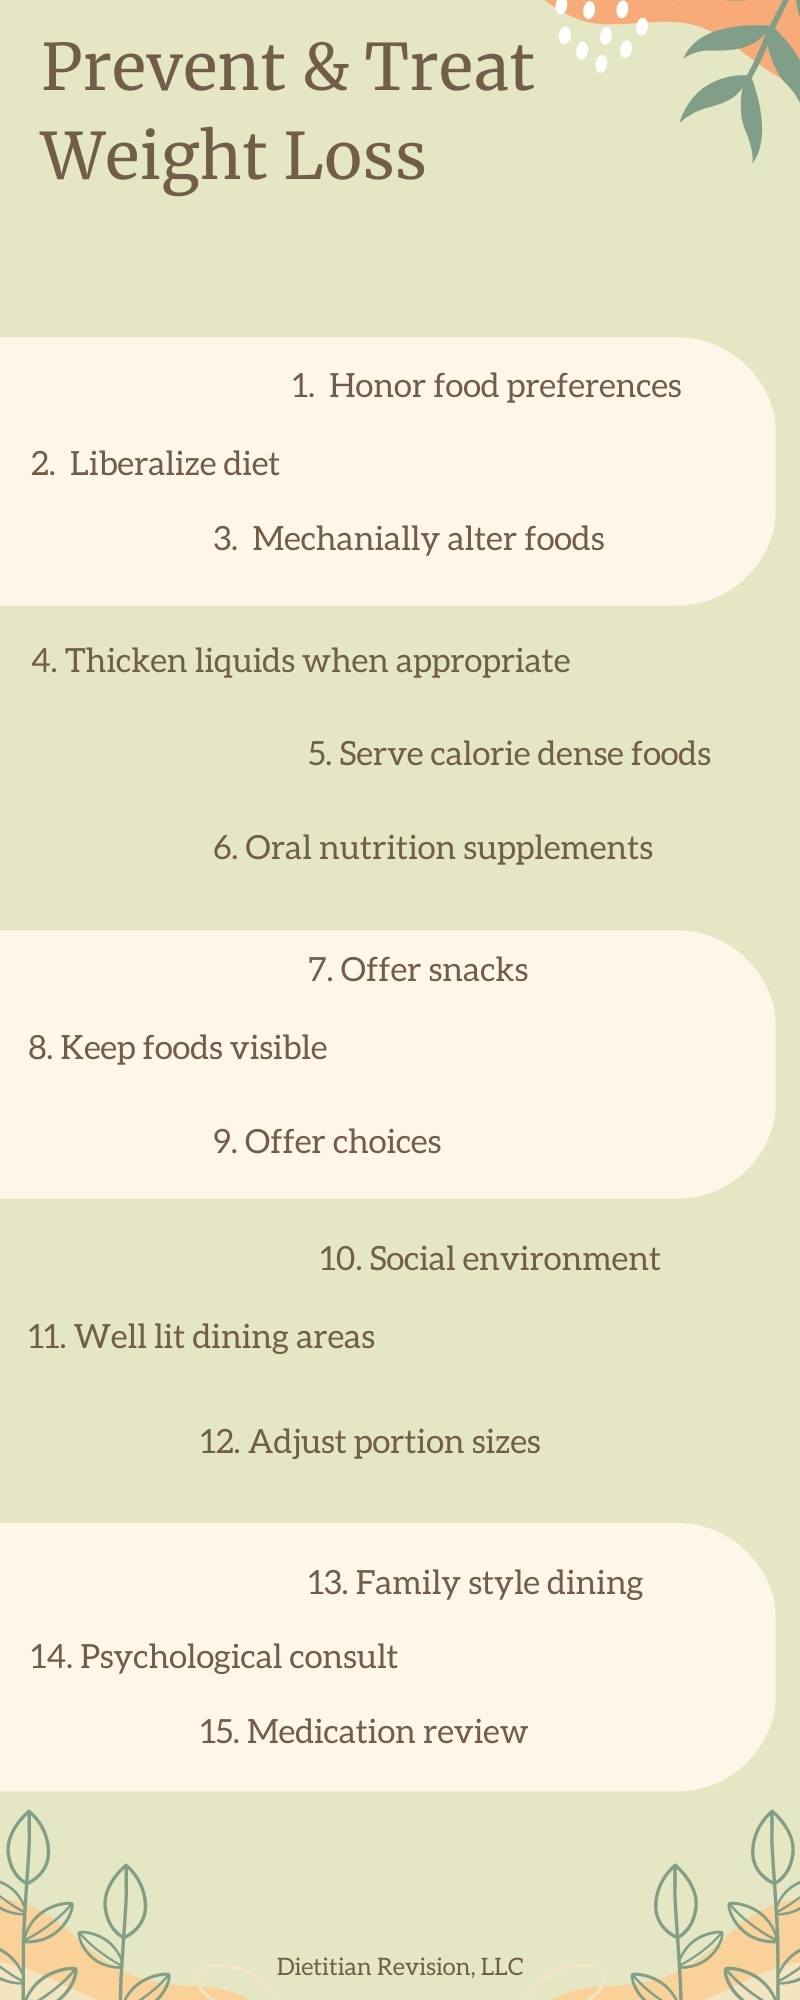 Prevent & treat weight loss: honor food preferences, liberalize diet, mechanically alter foods, thicken liquids, serve calorie dense foods, supplements, snacks, keep foods visible, offer choices, social environment, well lit dining rooms, adjust portion sizes, family style dining, psych consult, med review.  